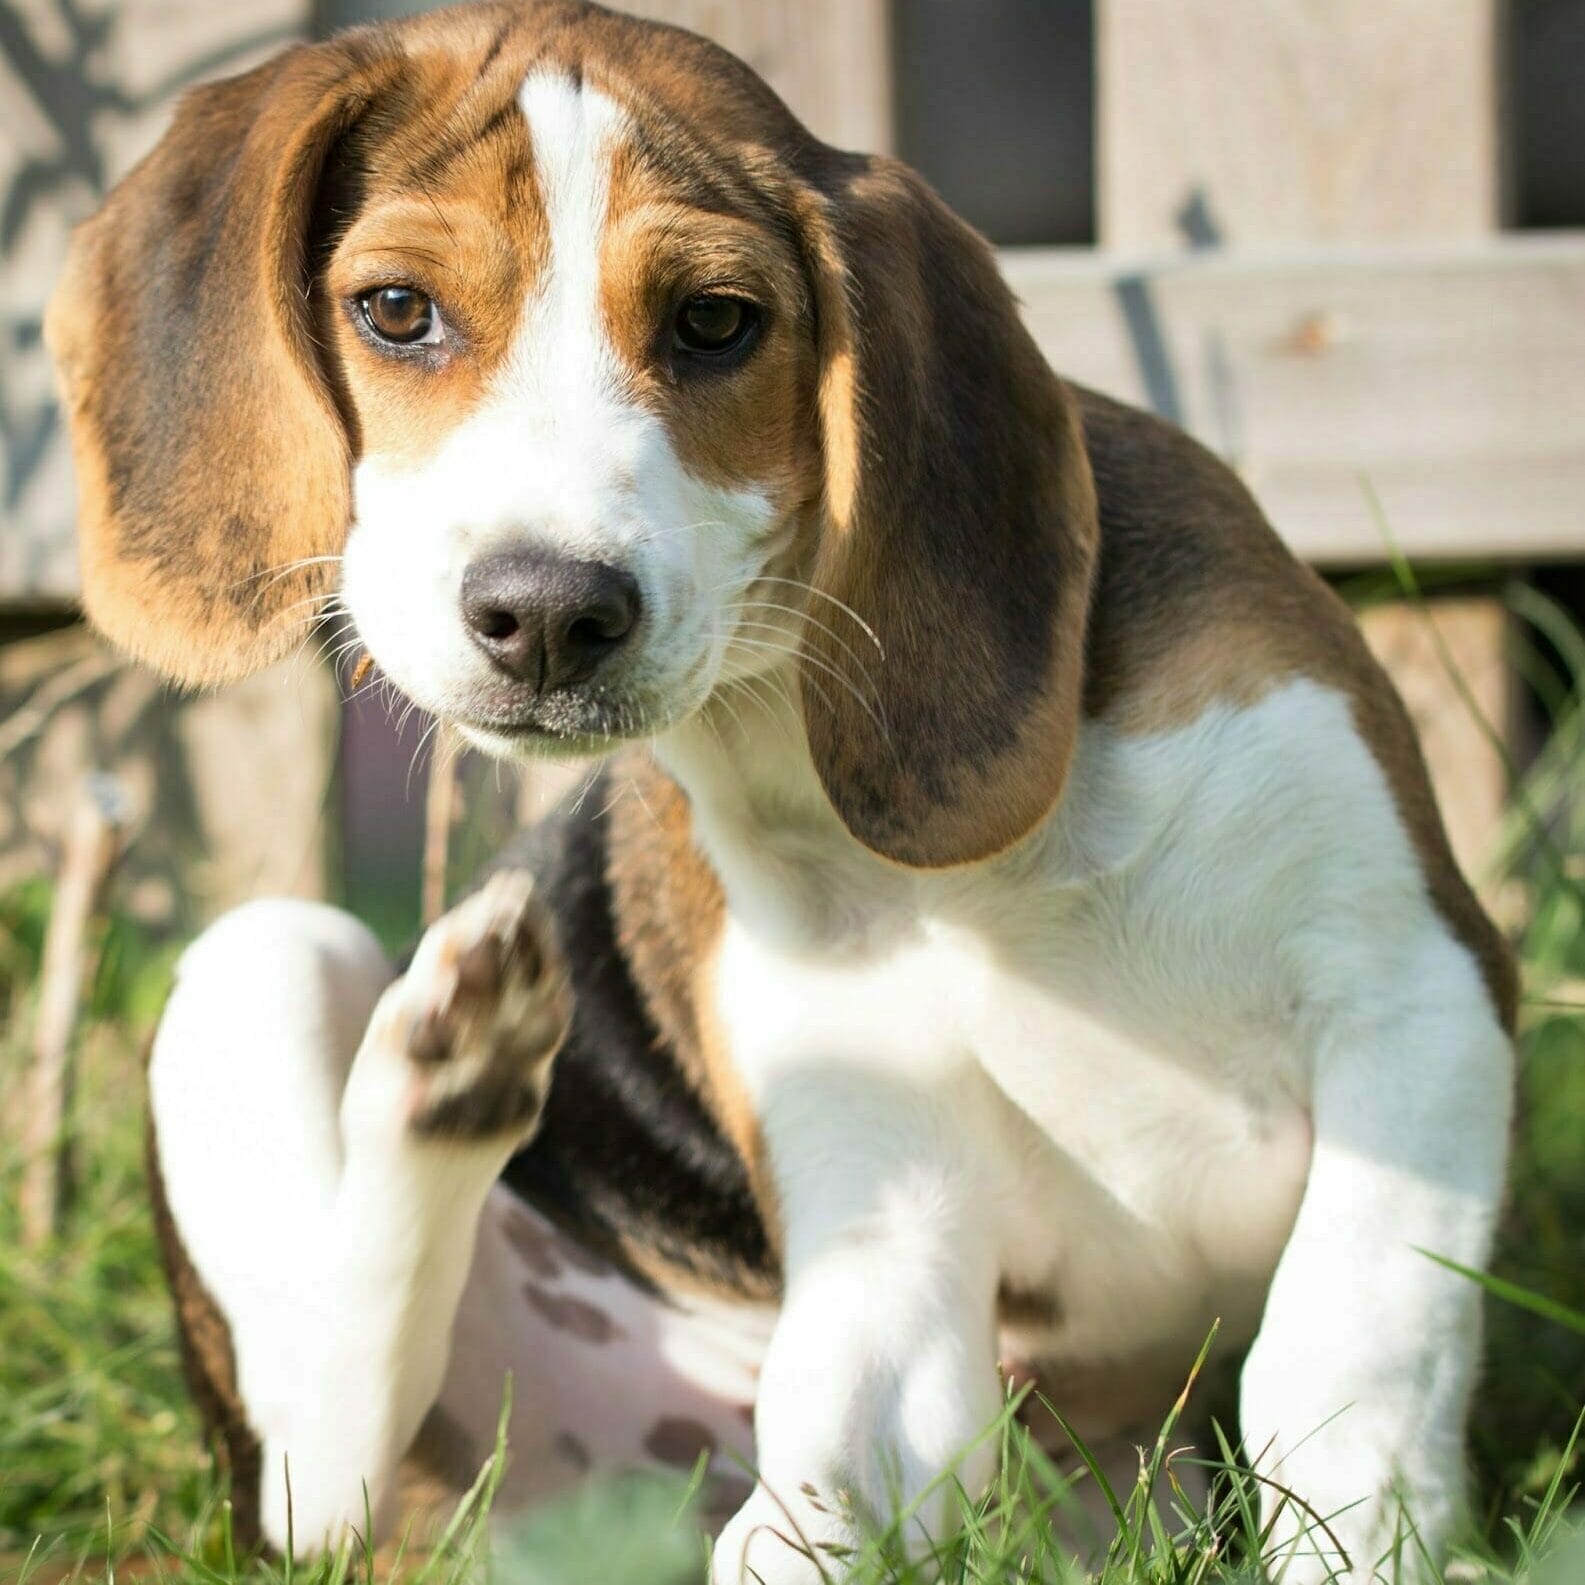 A Beagle puppy scratching behind their ear. CBD dog allergy supplements may help with scratching. Allergy supplements for dogs are available by Earth Buddy.